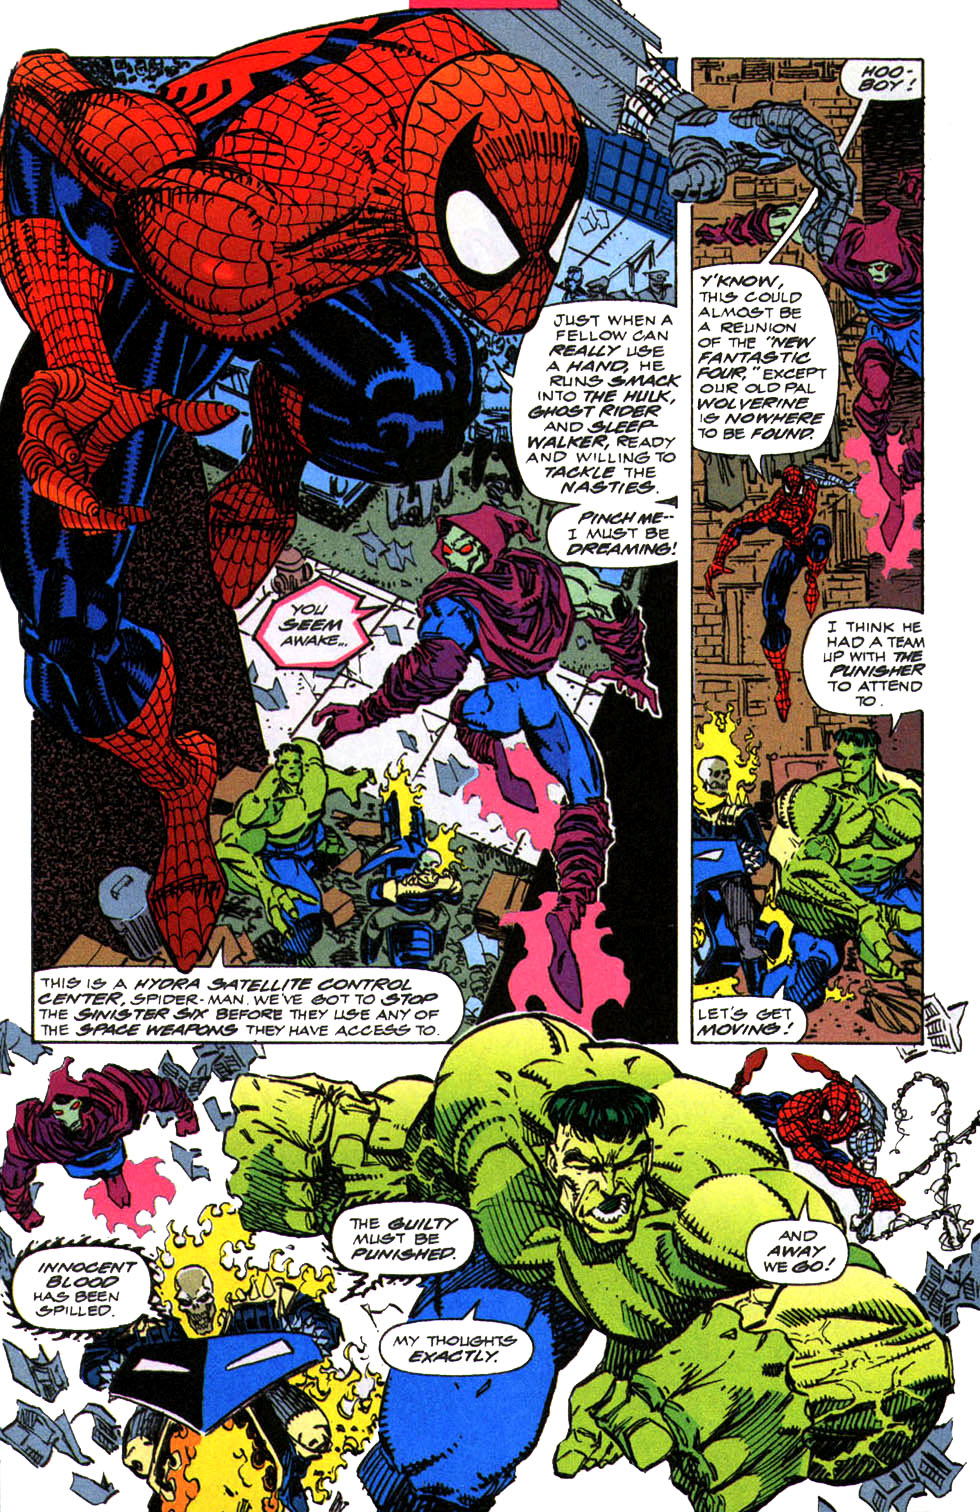 Spider-Man (1990) 22_-_The_Sixth_Member Page 15